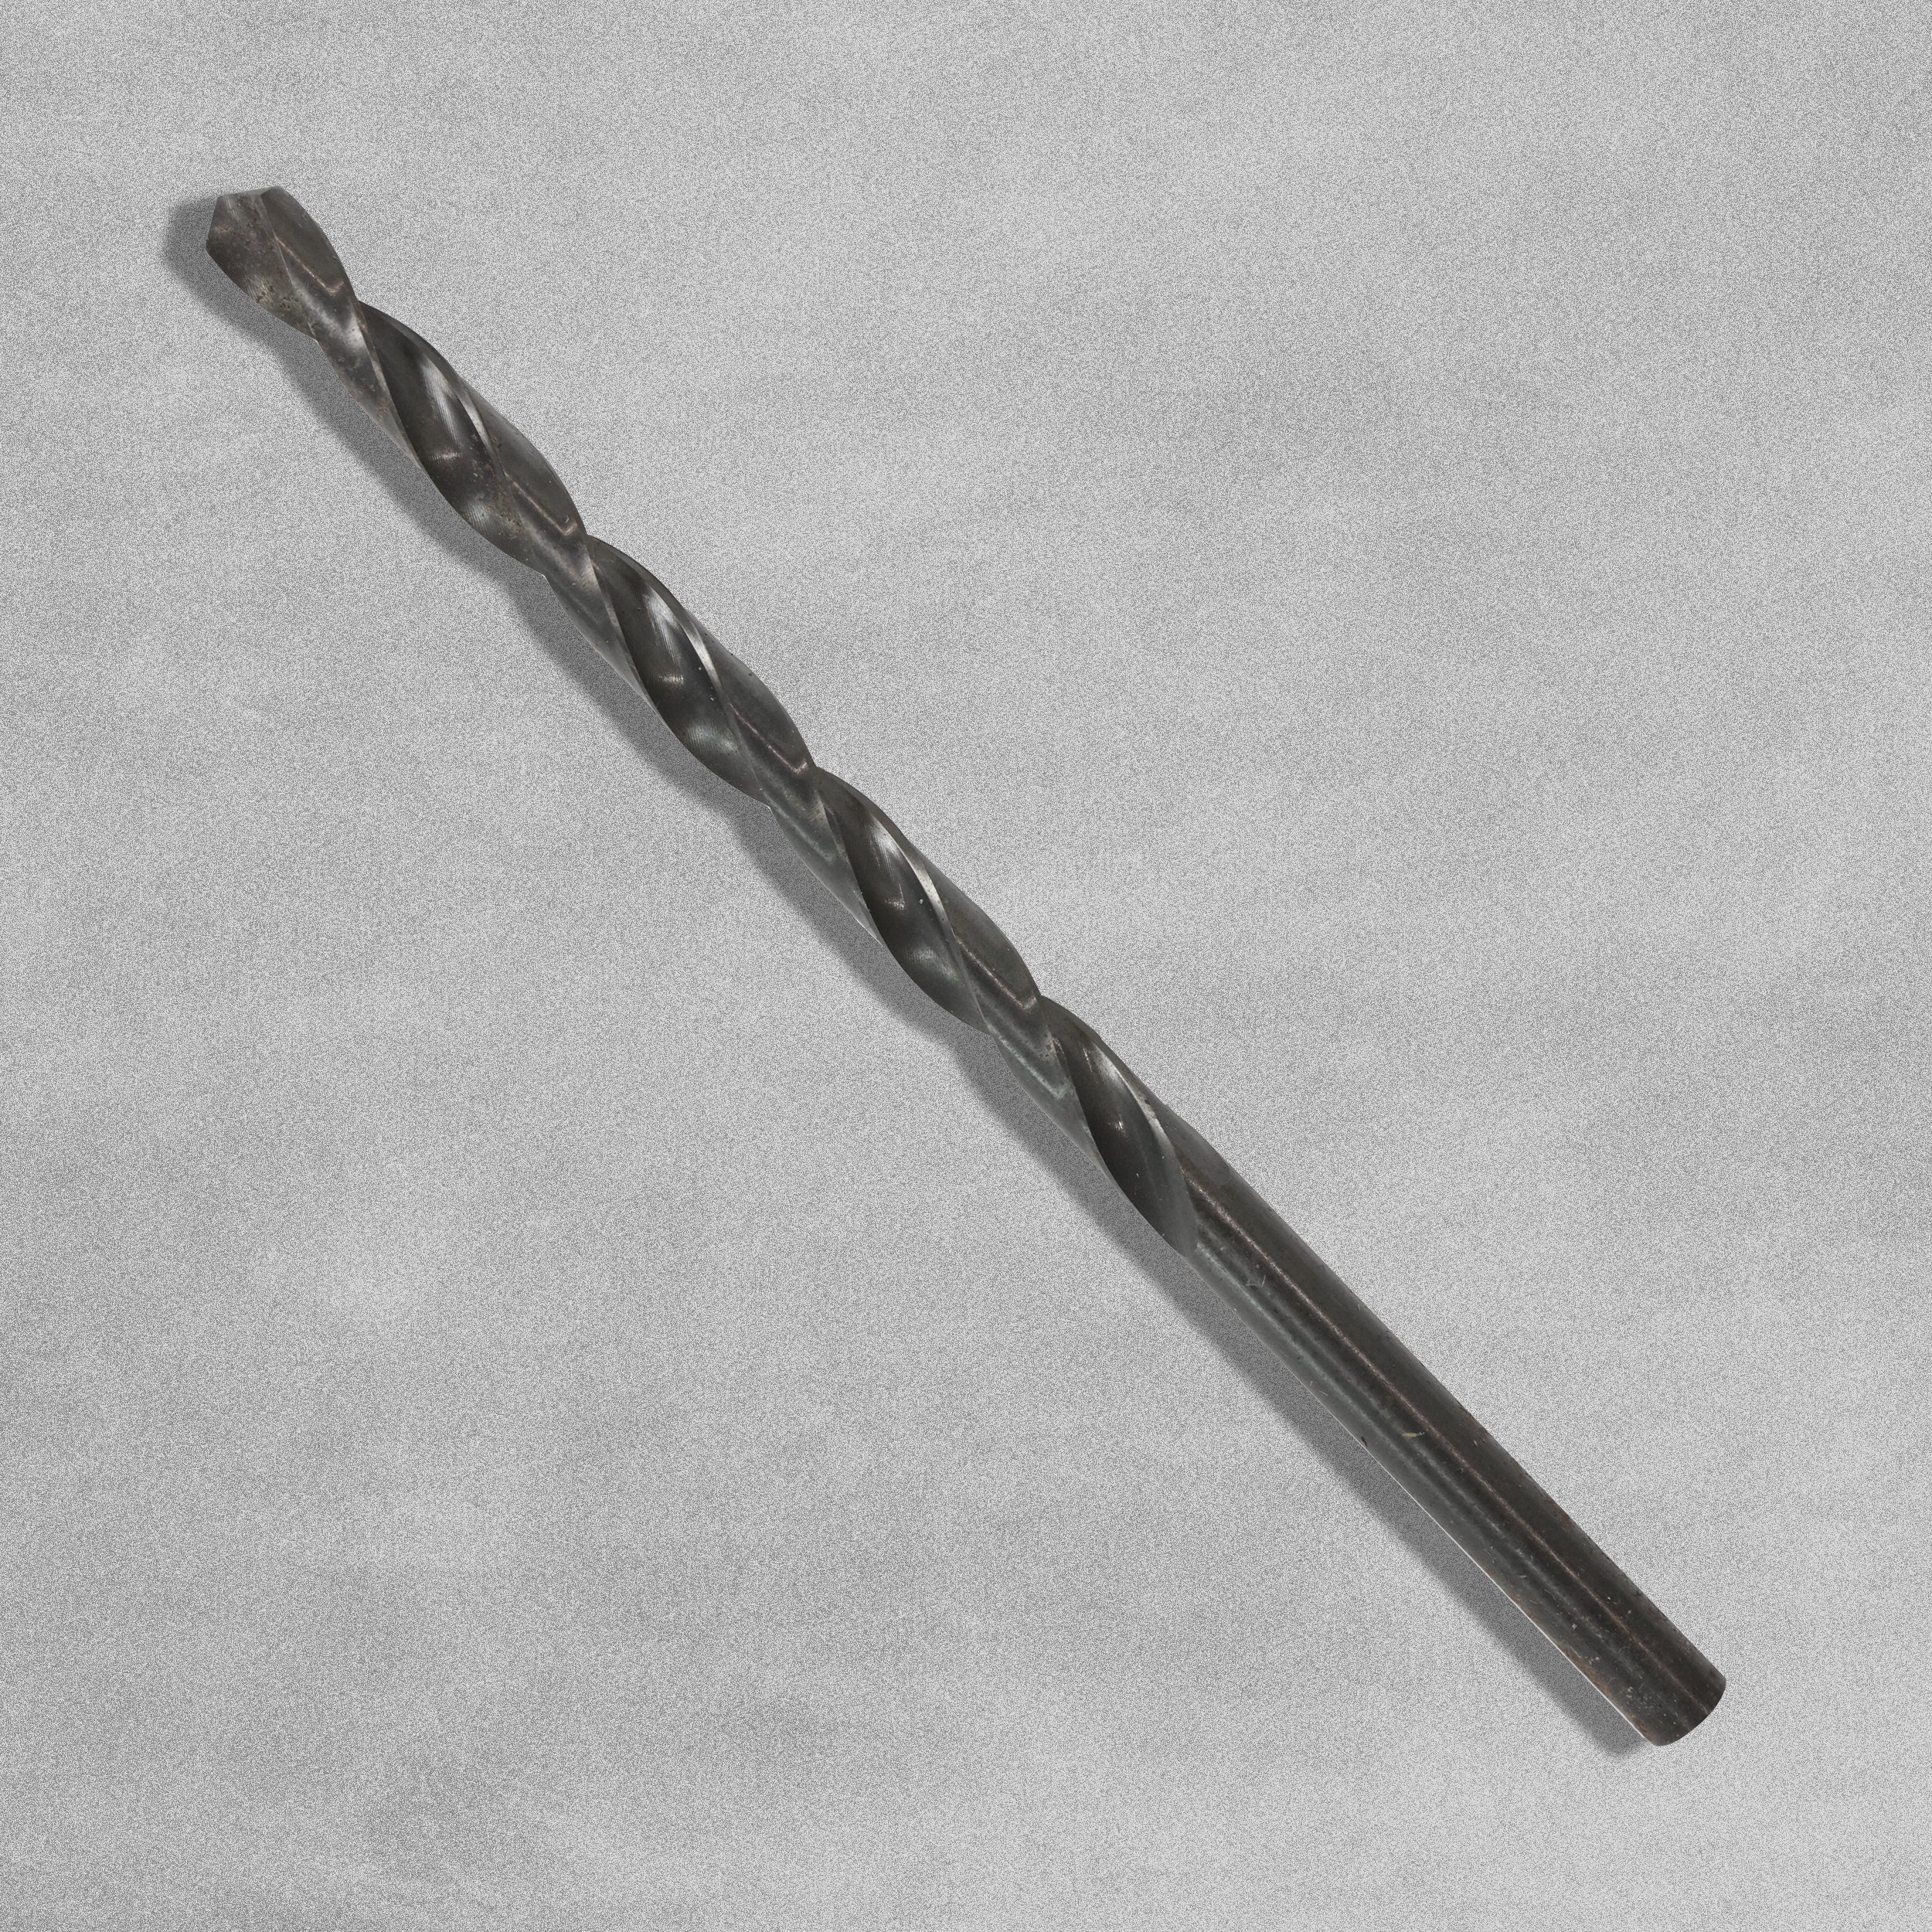 HSS Metal Long Series Drill Bit 7.9mm by BBW Germany, sold by In-Excess